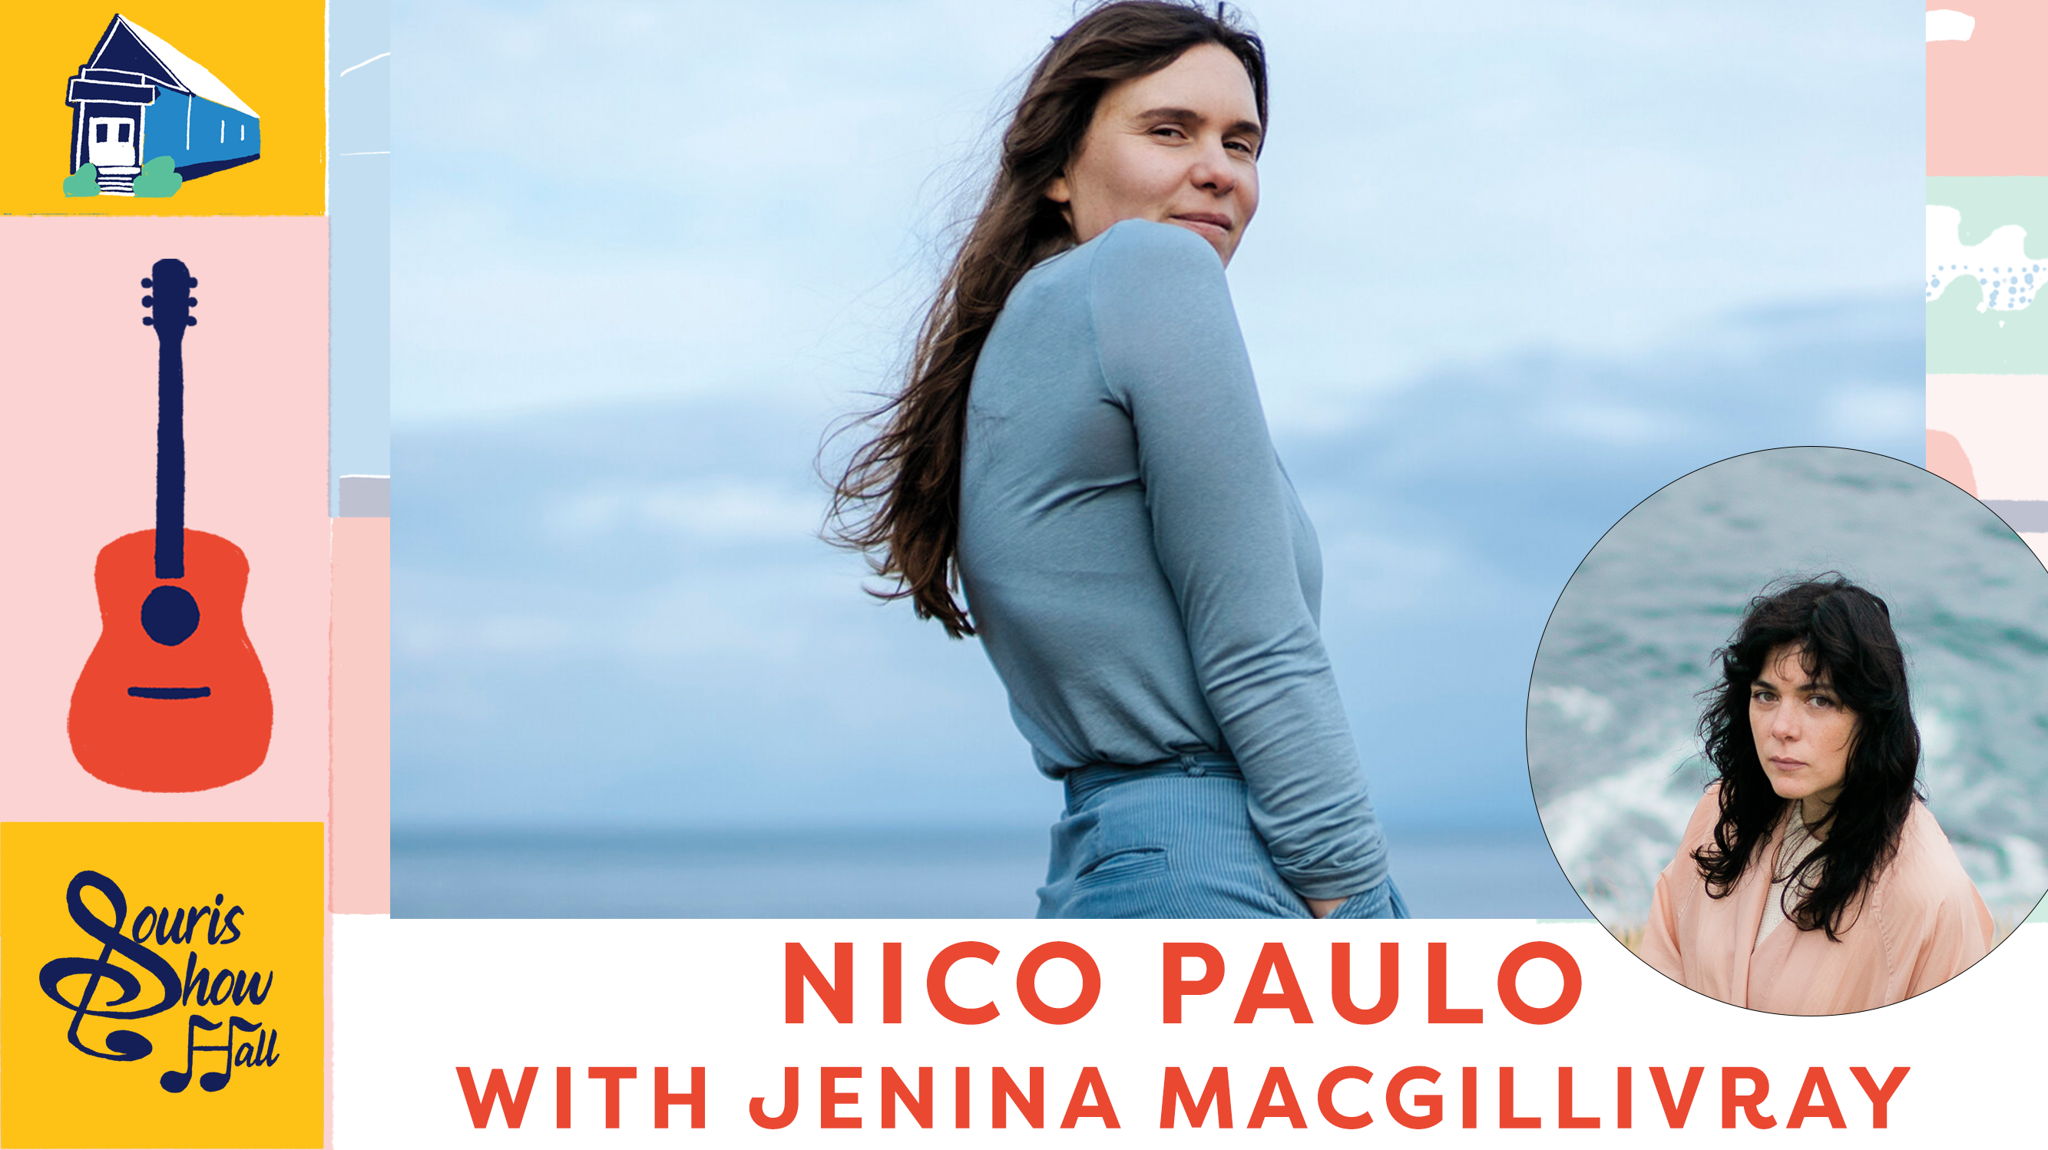 Nico Paulo with special guest Jenina MacGillivray at the Souris Show Hall